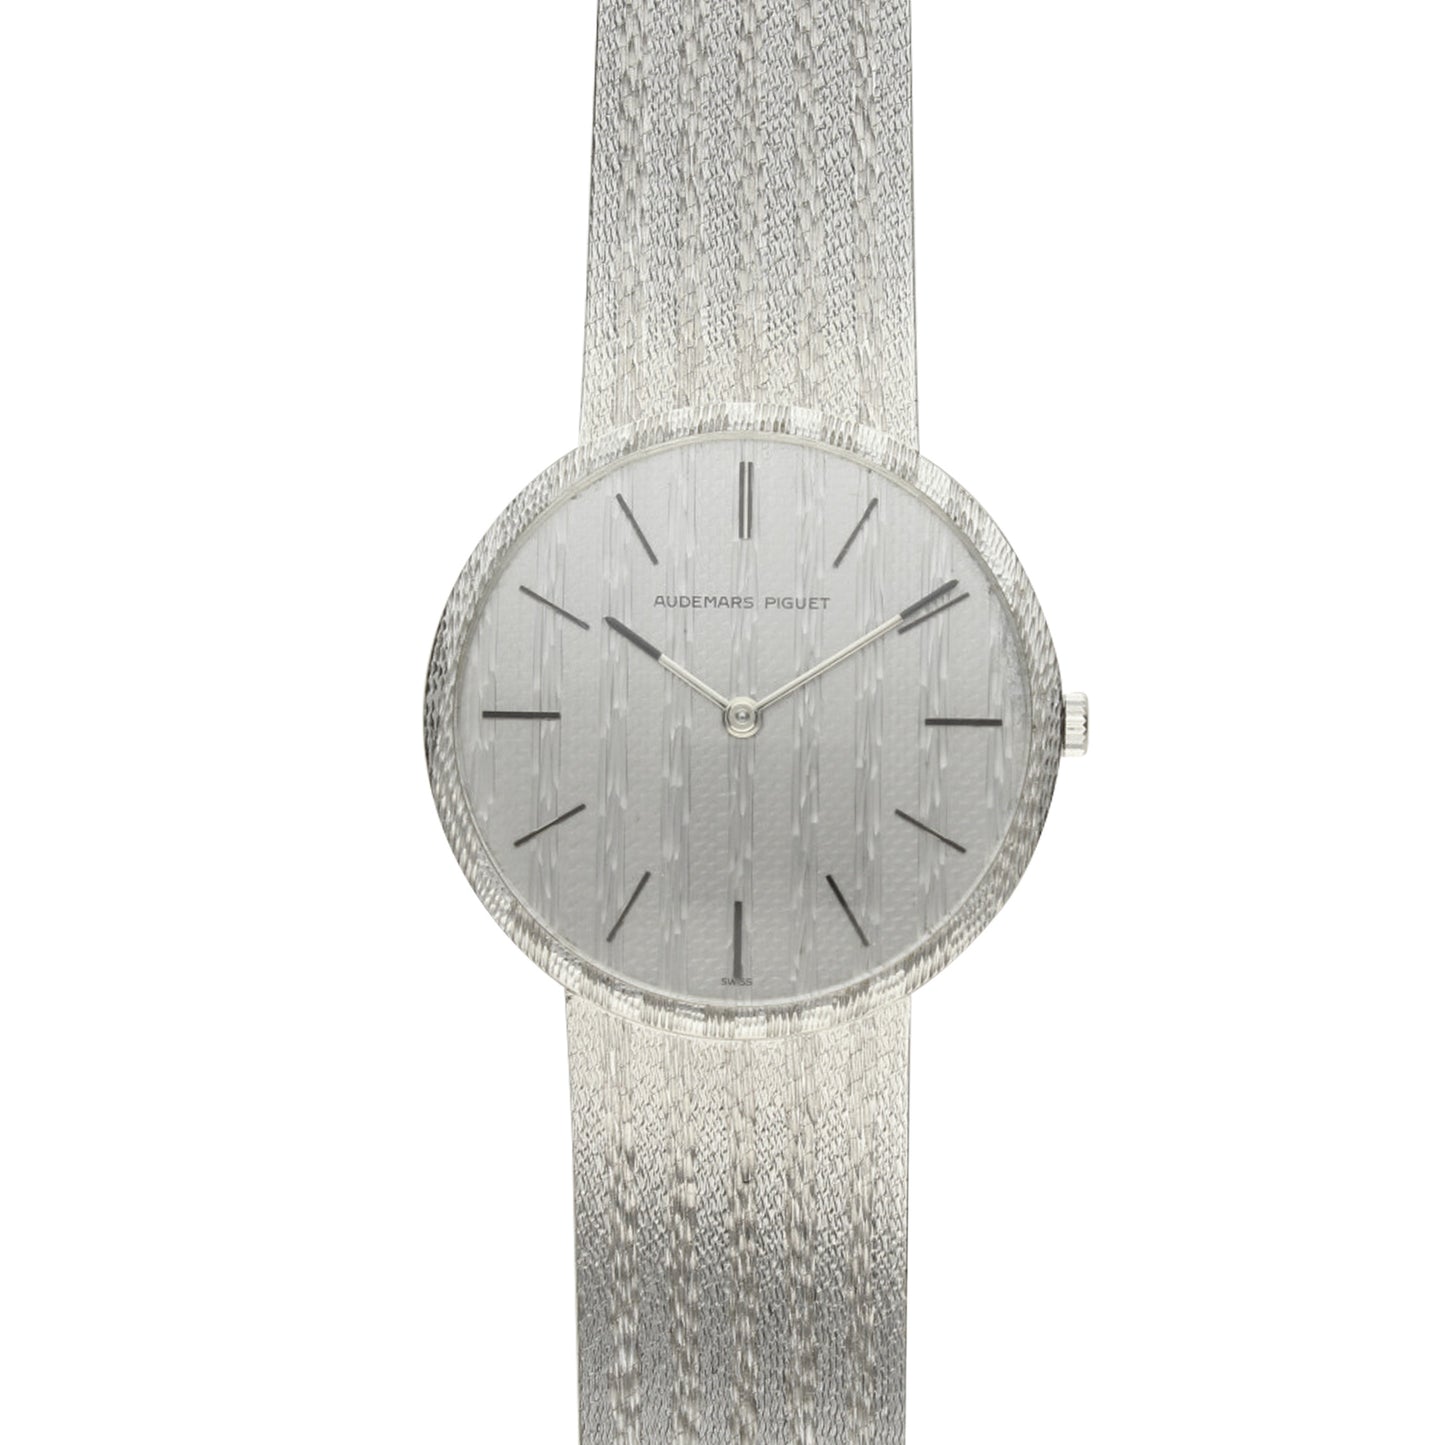 18ct white gold automatic bracelet watch. Made 1960's